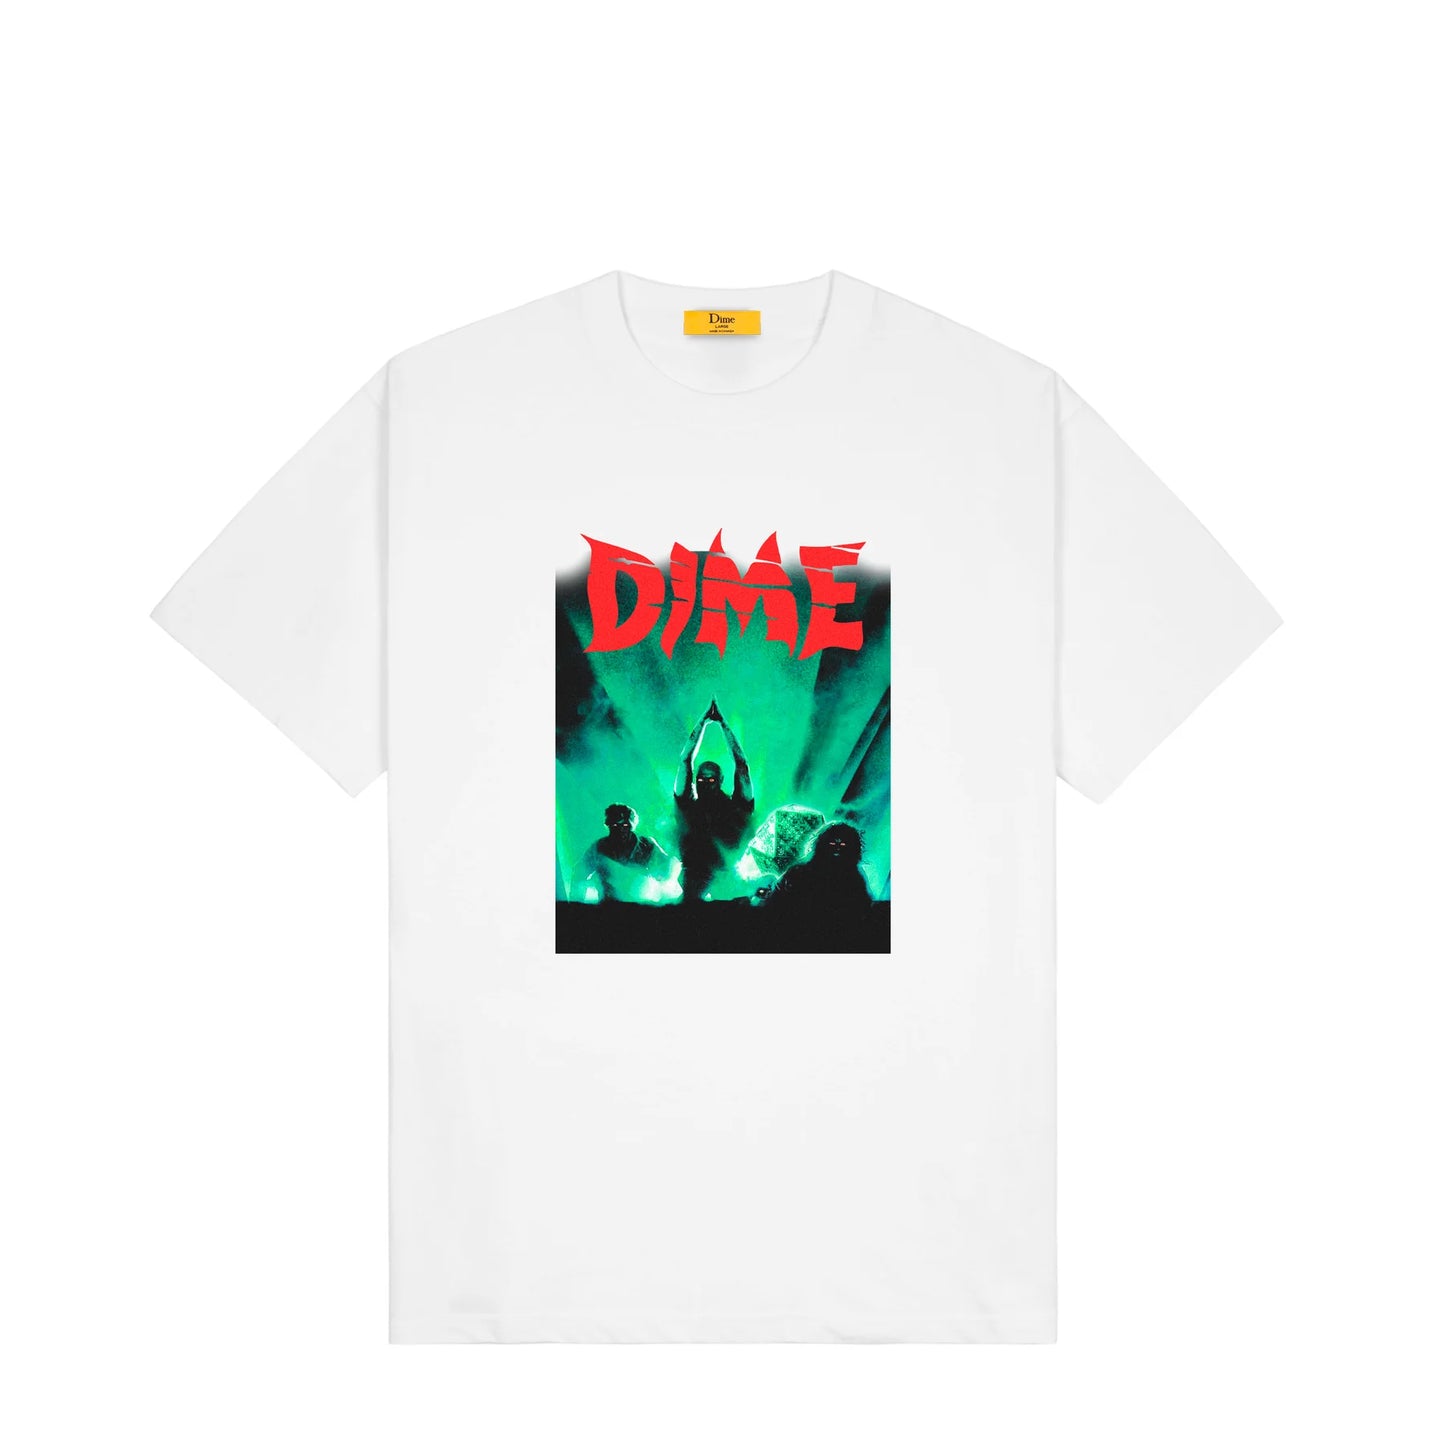 Speed Demons S/S Tee ShirtWht or Blk(size options listed)